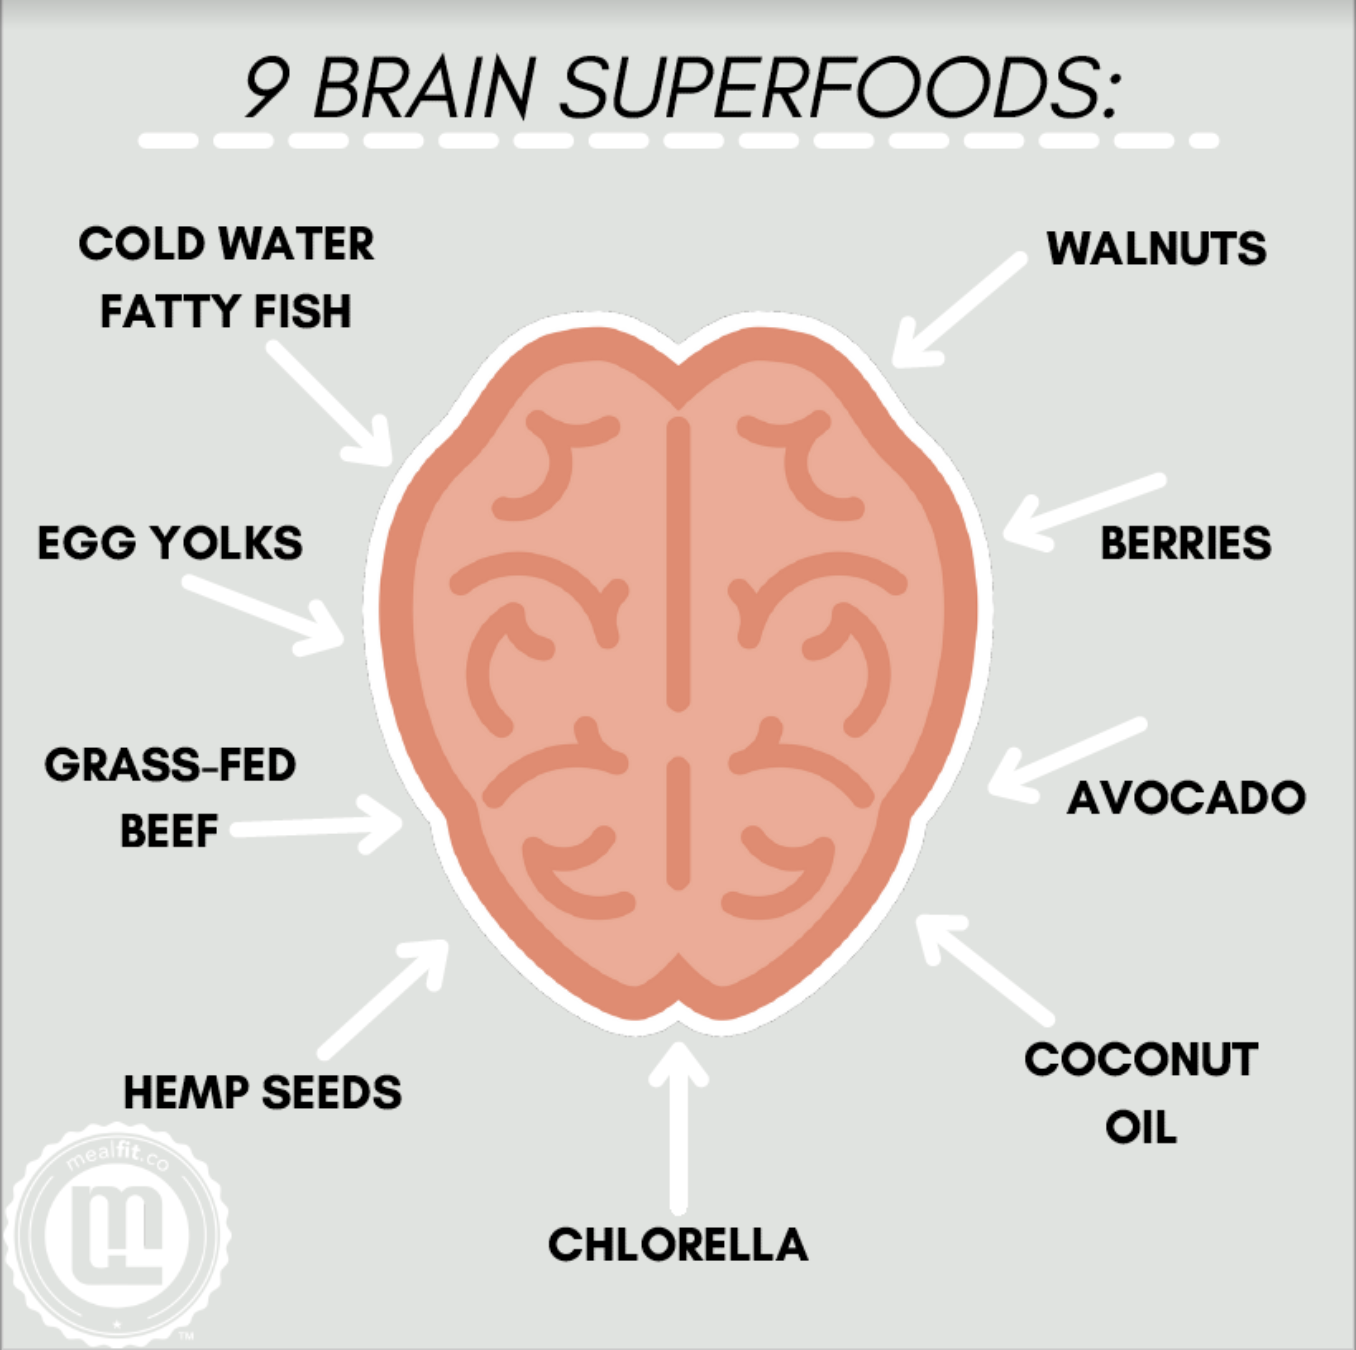 9 Superfoods for a Healthy Brain